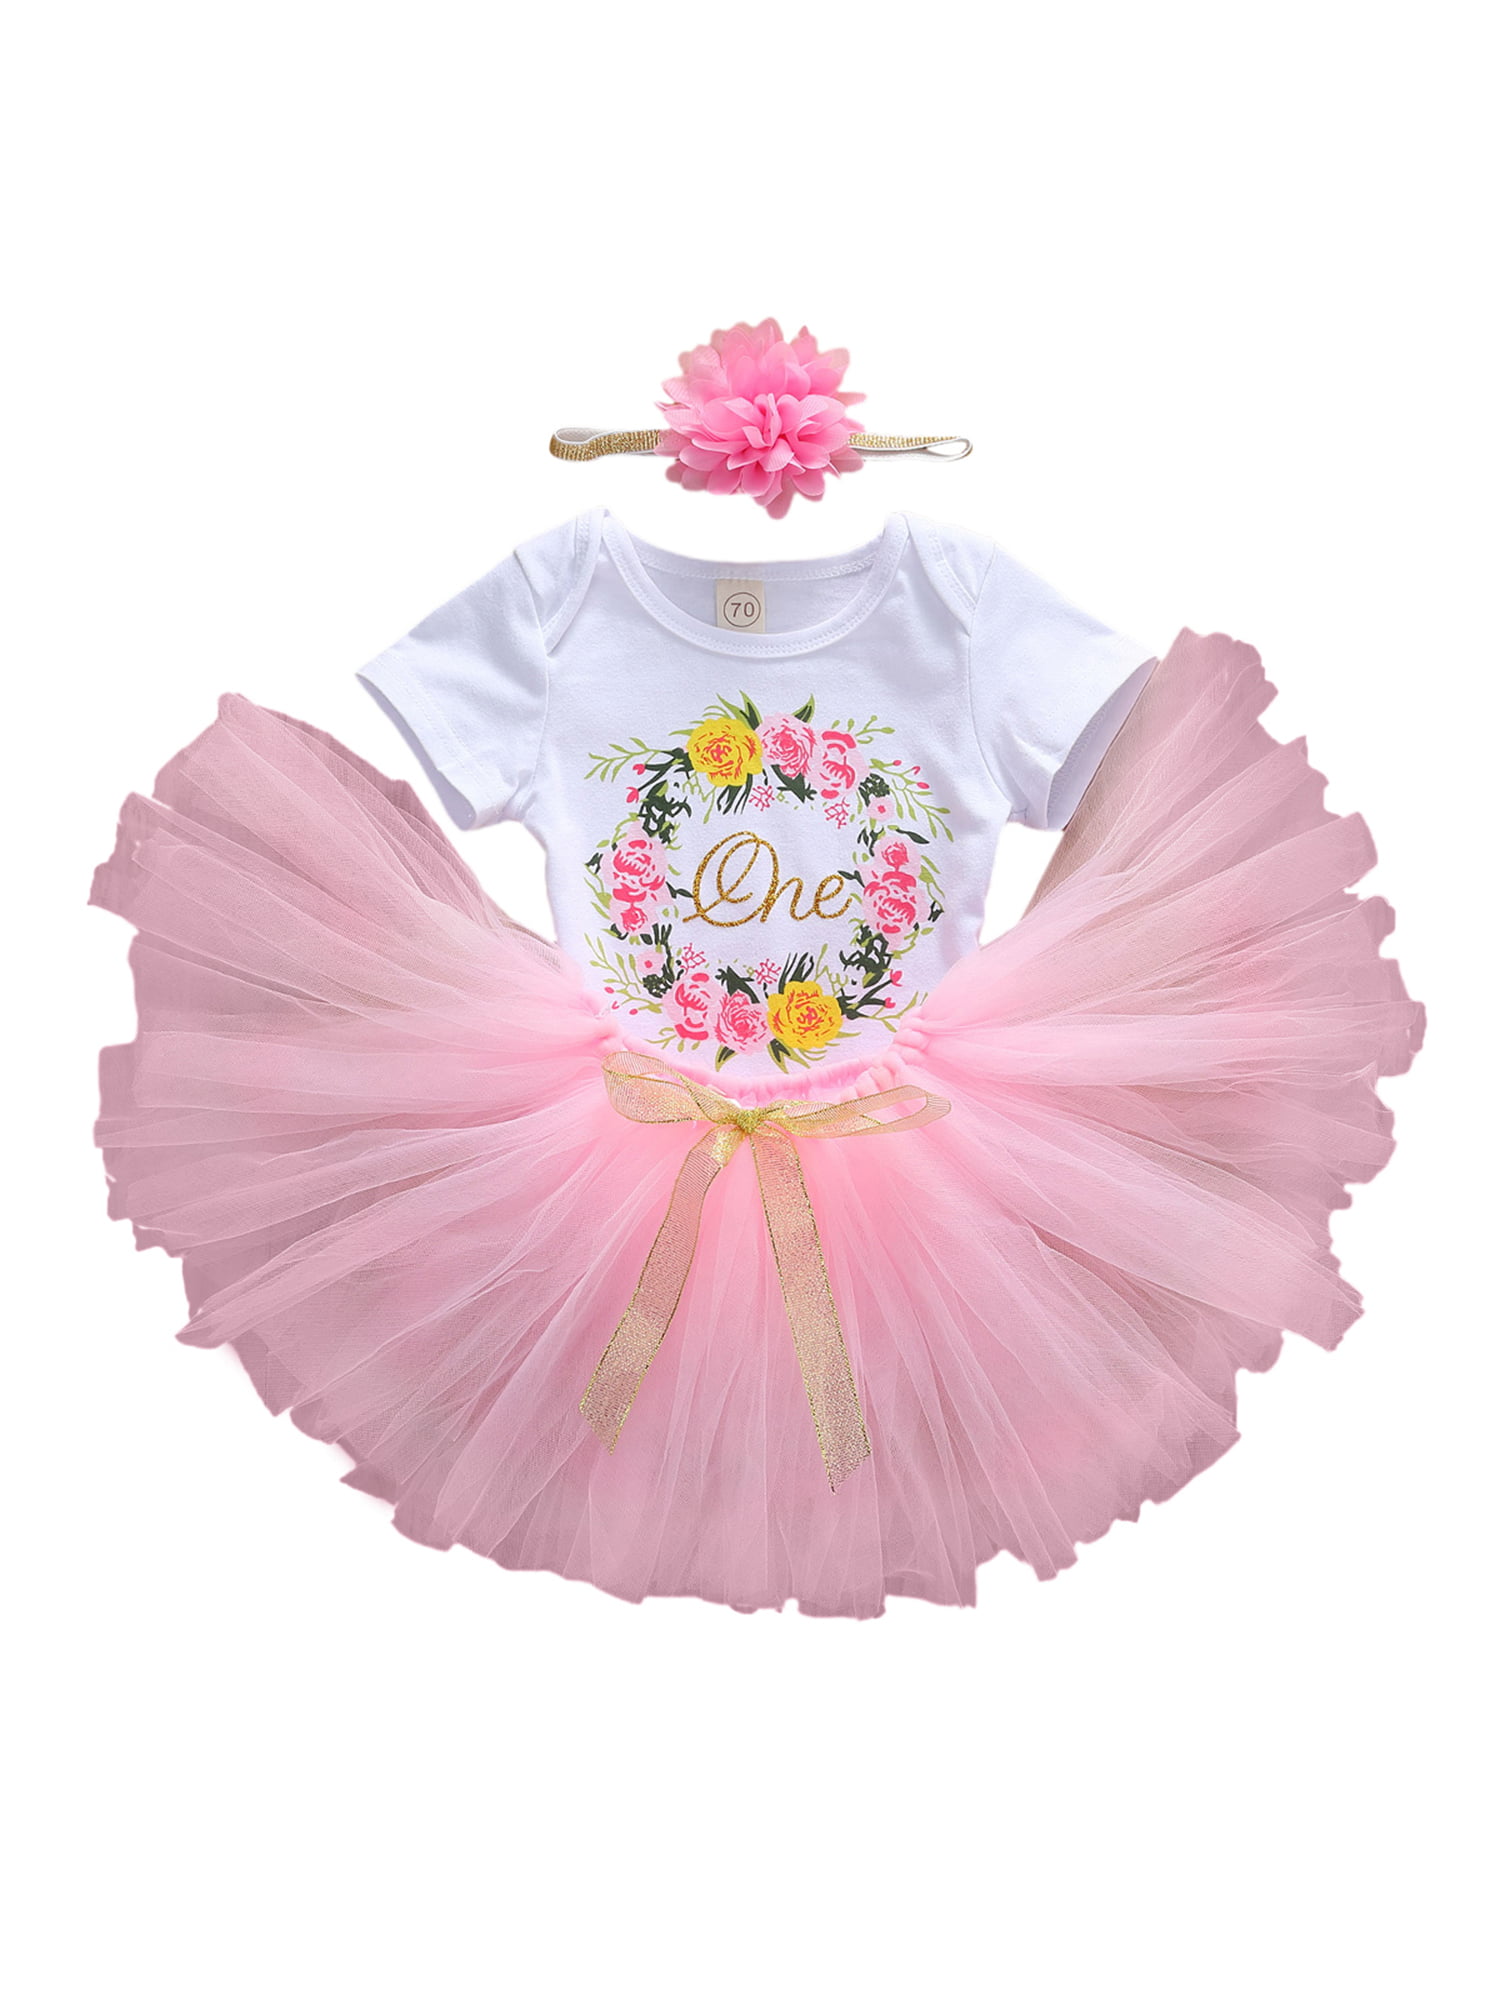 Baby Girl One Birthday Outfit Floral Lace Romper Tutu Skirts Clothes Set 